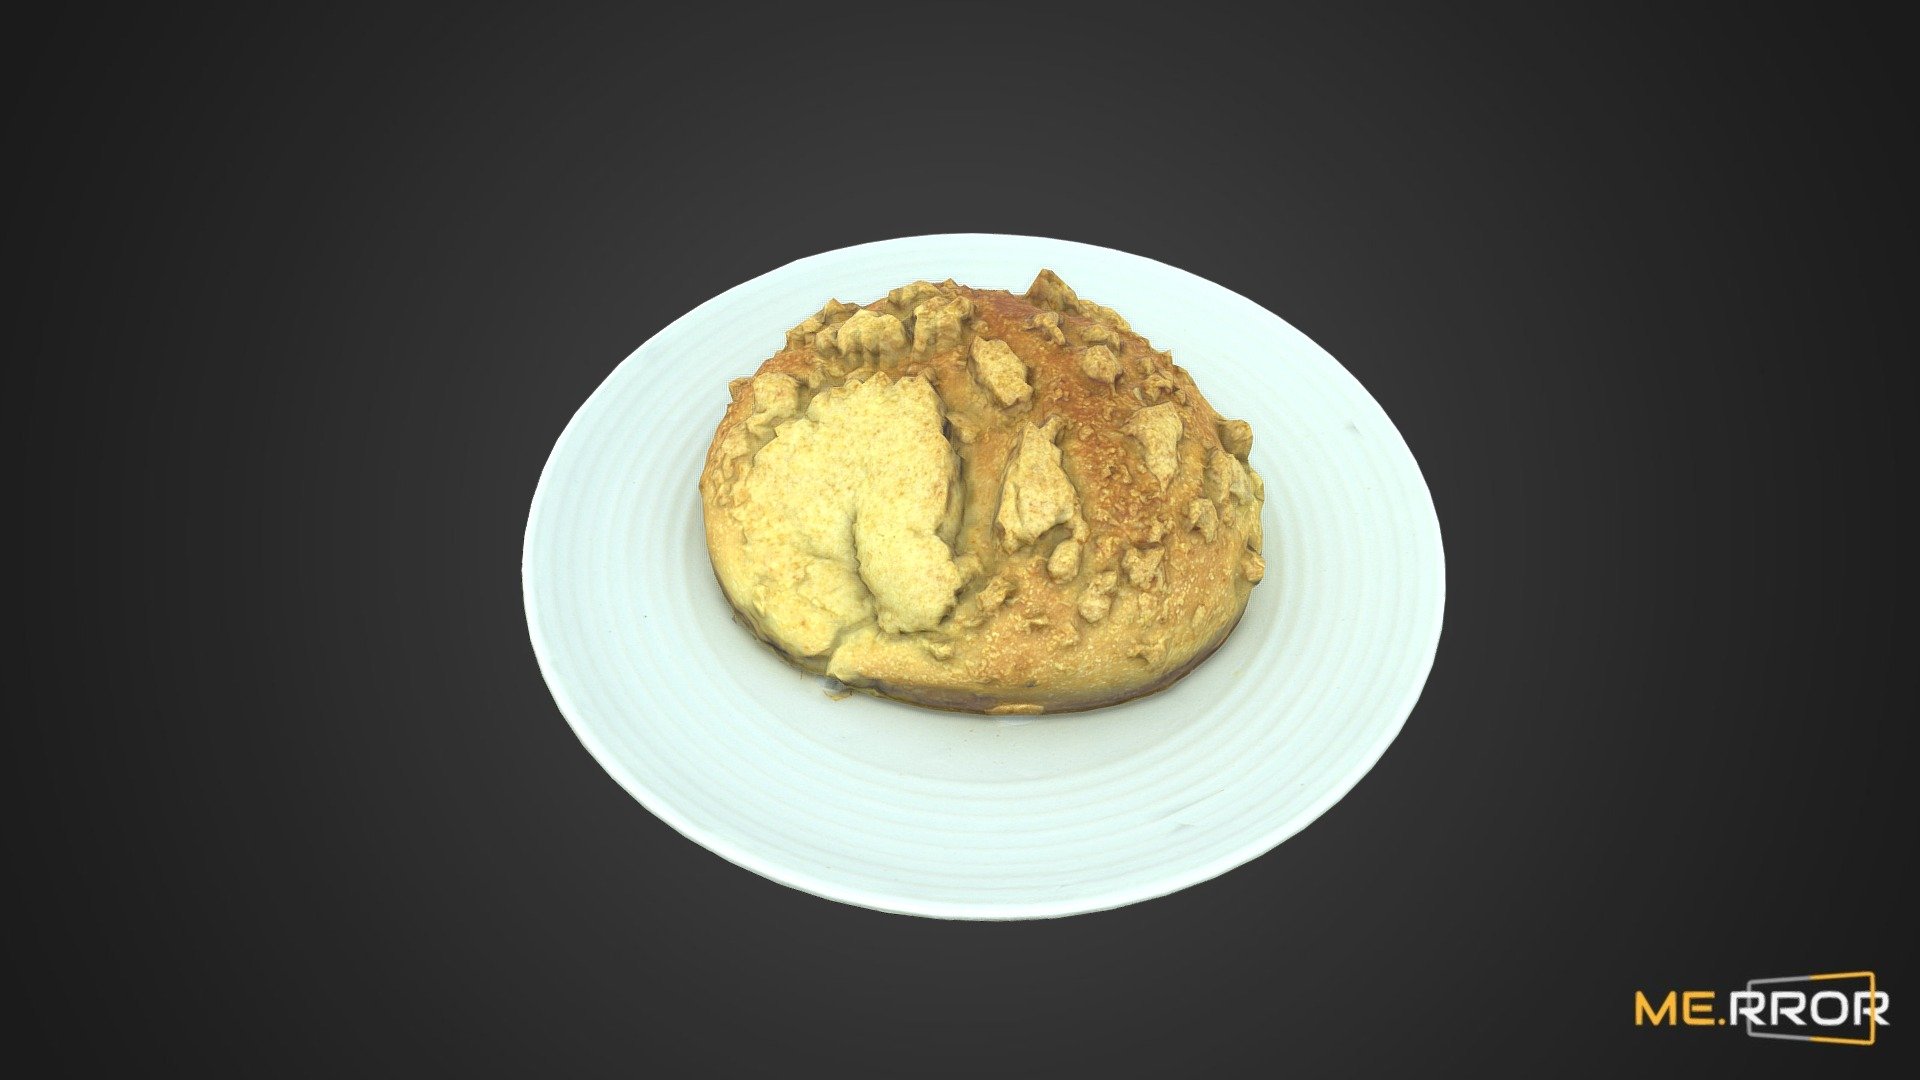 MERROR is a 3D Content PLATFORM which introduces various Asian assets to the 3D world

#3DScanning #Photogrametry #ME.RROR - [Game-Ready] Streusel Bread - Buy Royalty Free 3D model by ME.RROR Studio (@merror) 3d model